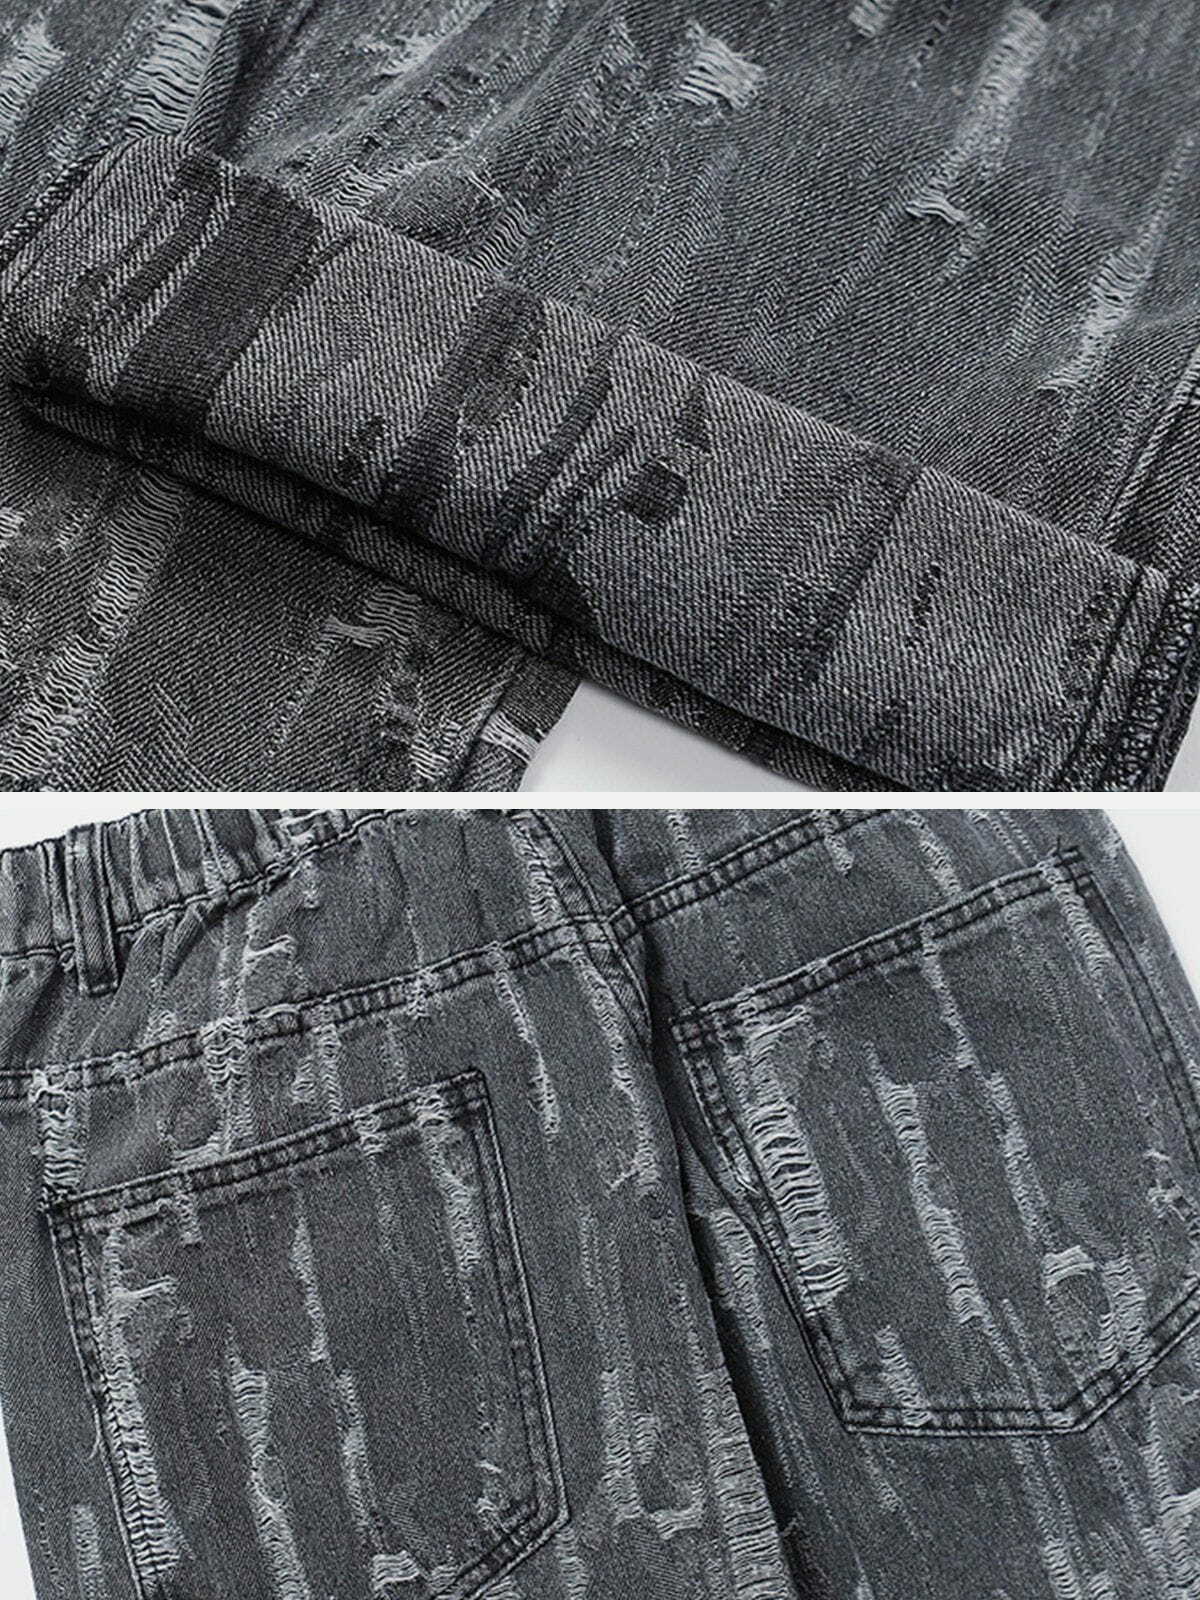 retro scratched jeans edgy & timeless denim 4207